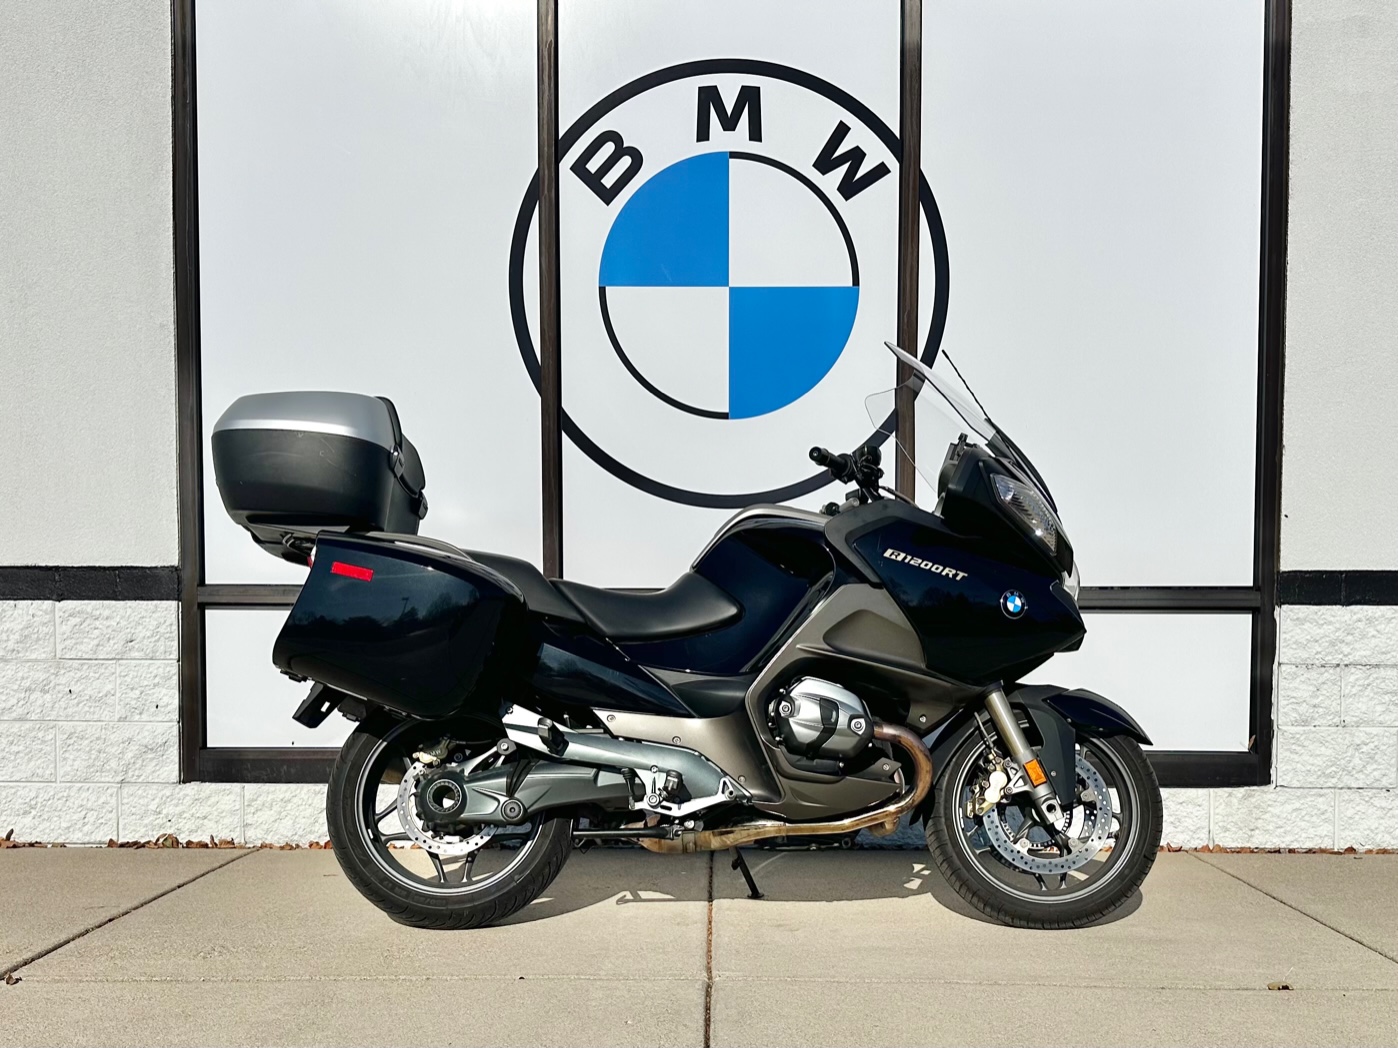 BMW GS R 1250 Rallye review - life test » The Girl On A Bike